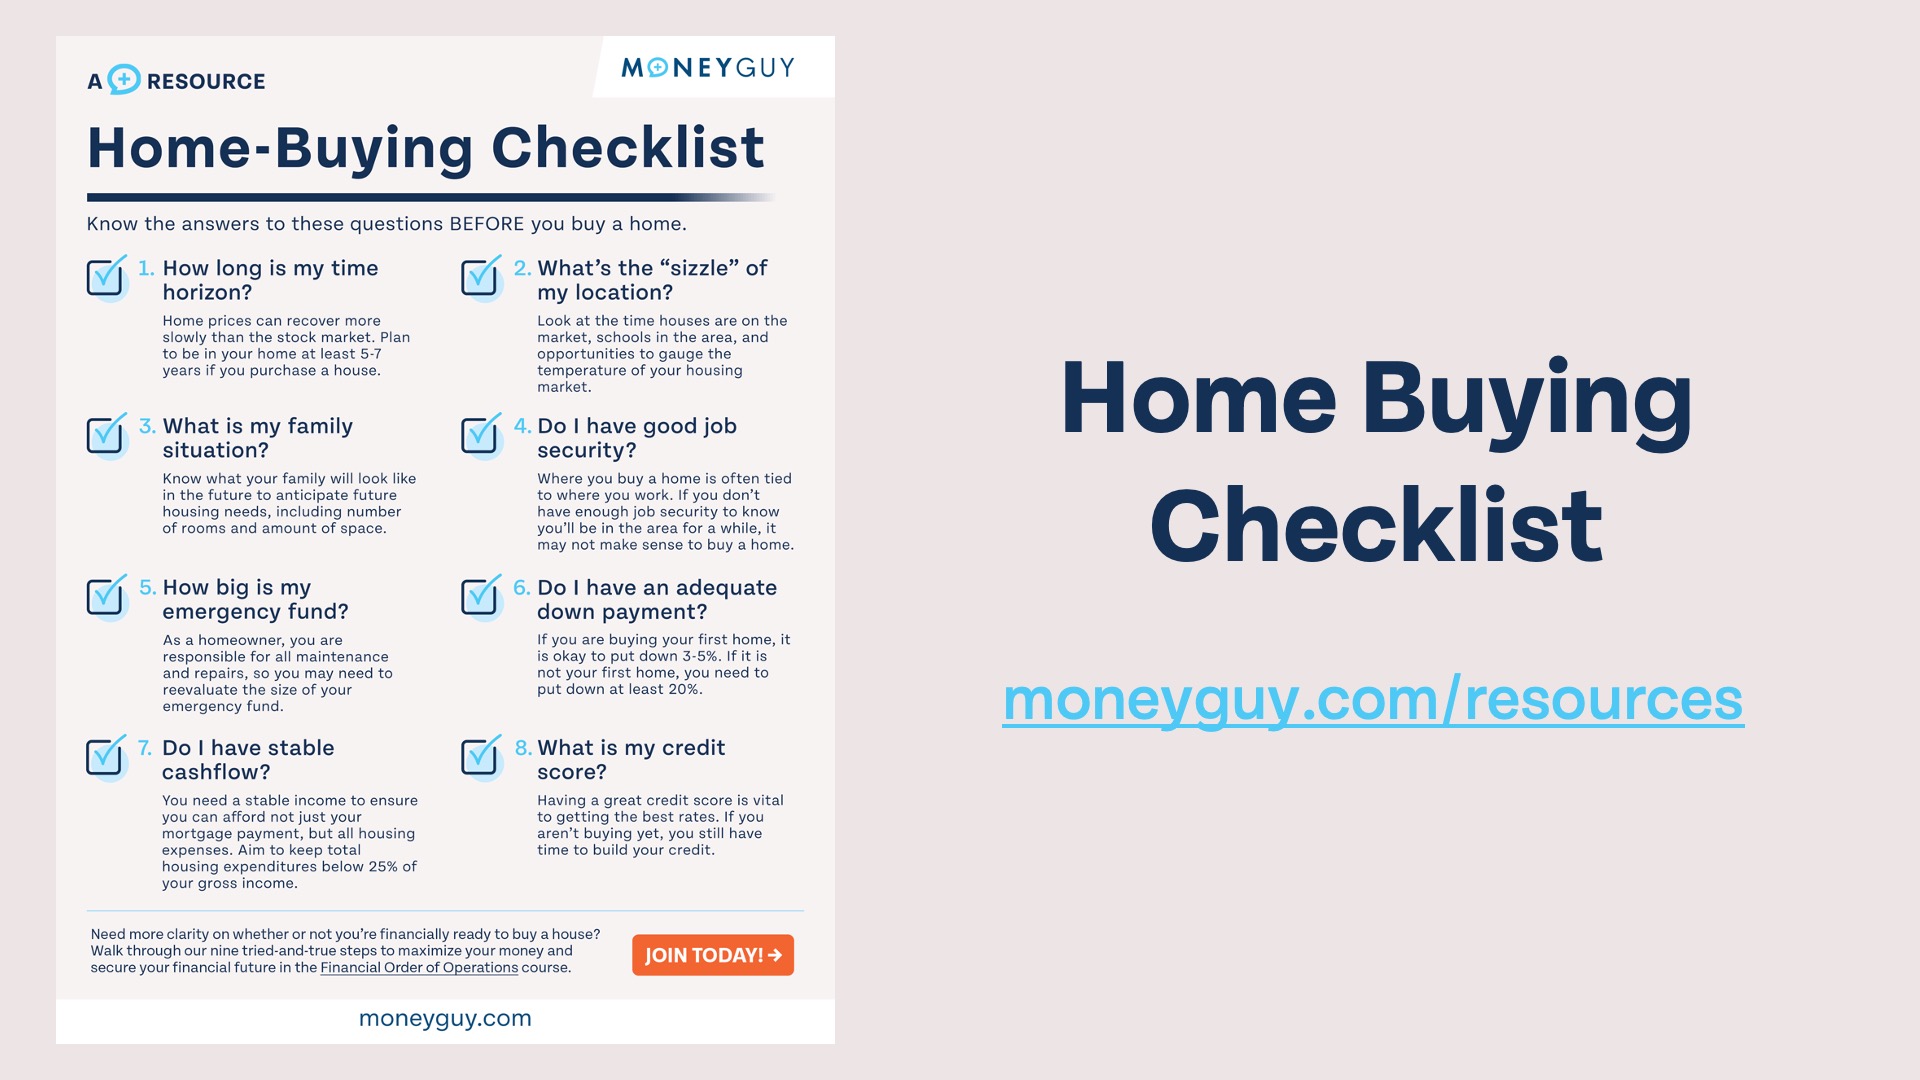 Screenshot of Money Guy's Popular Home Buying Checklist, which is free to download as a PDF from the Resources section of the moneyguy.com website.